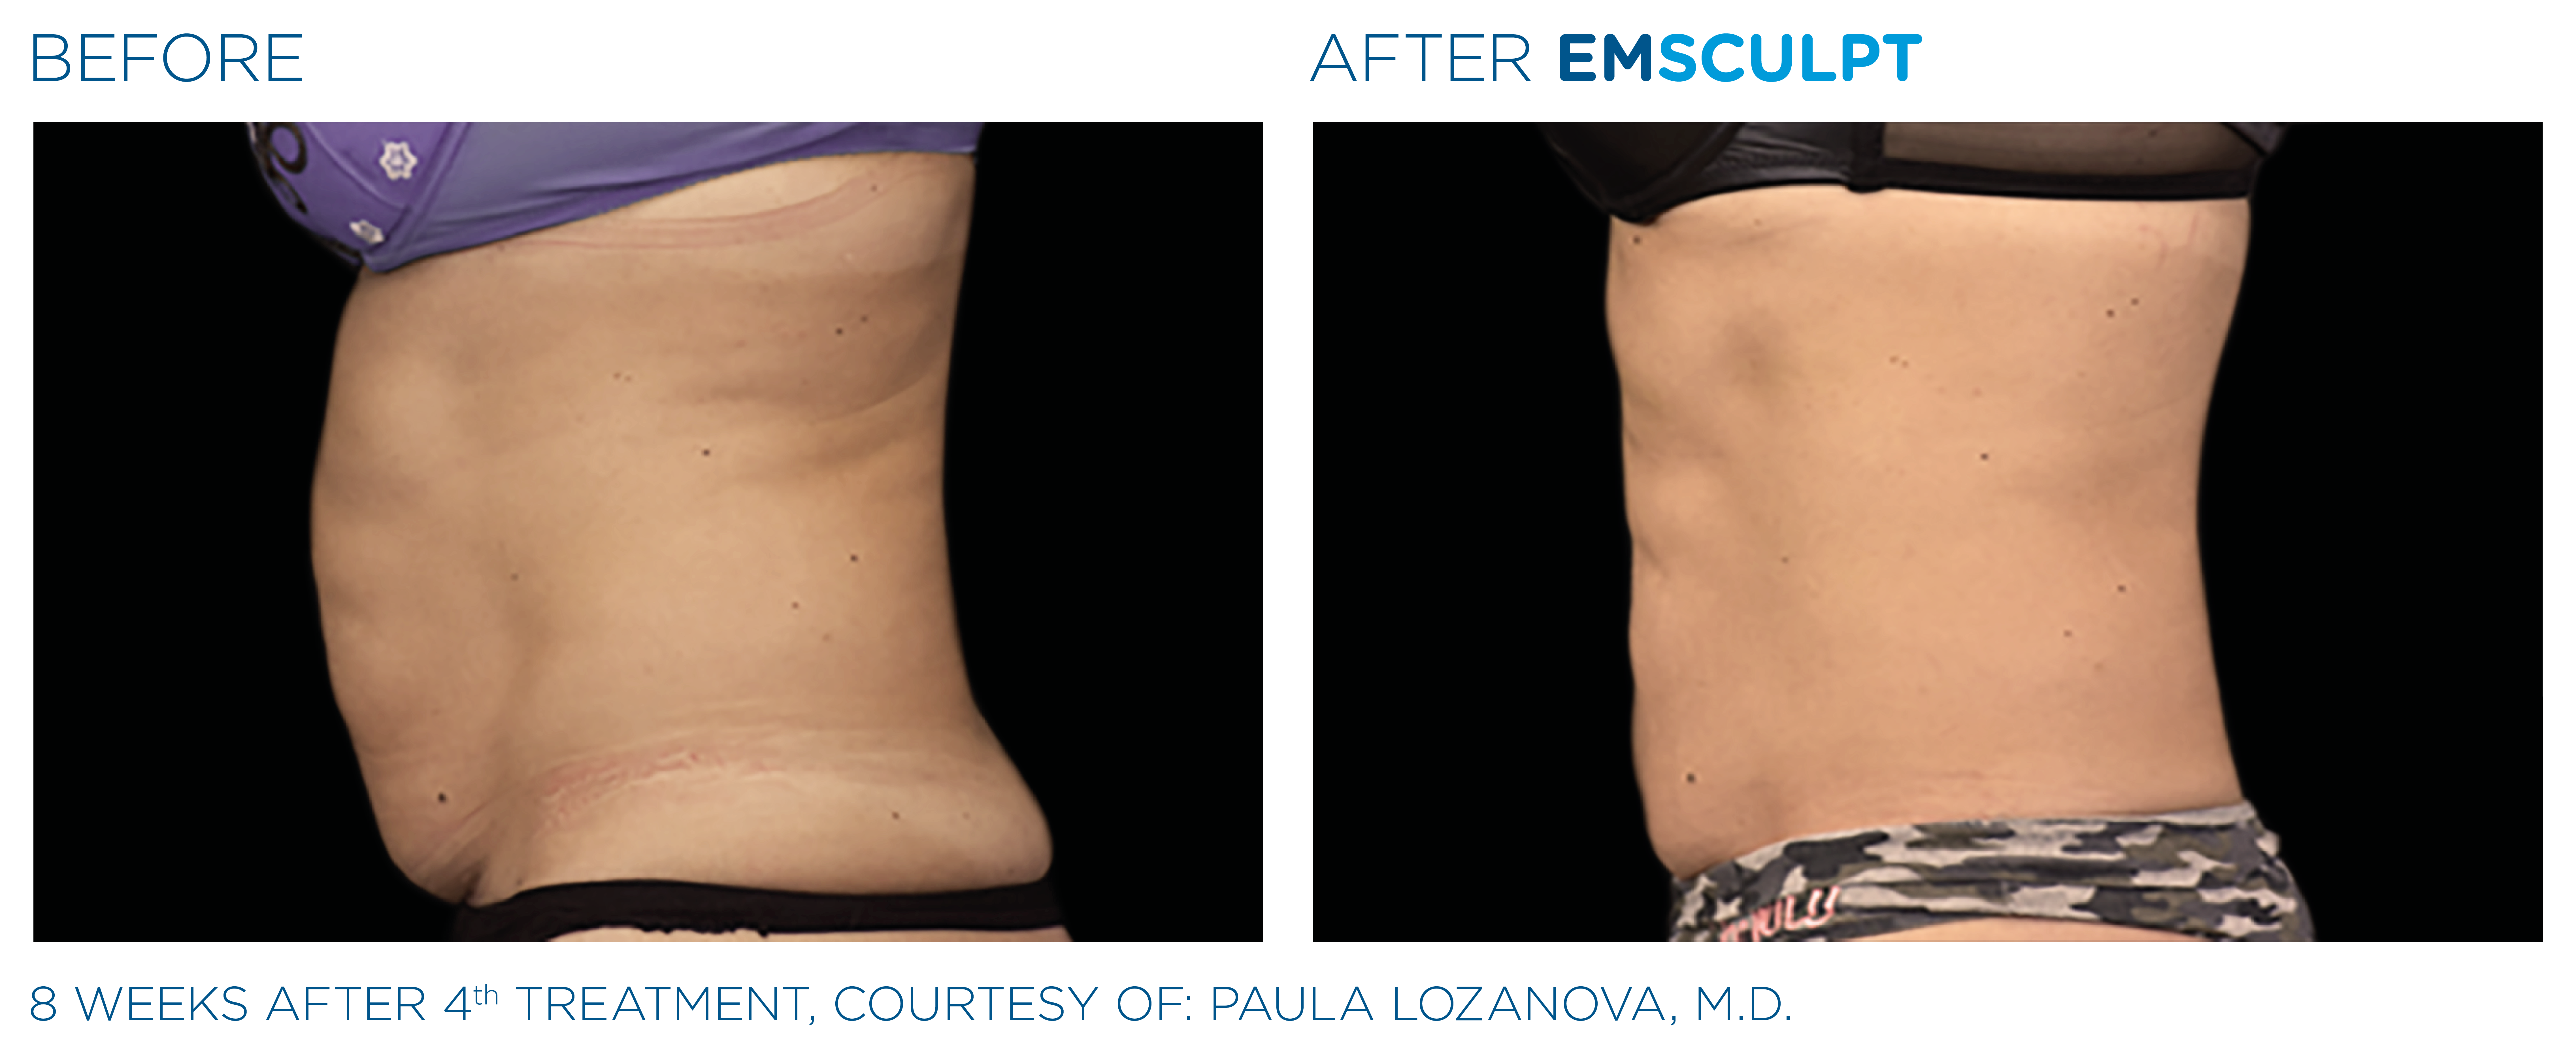 Body and Muscle Contouring with EMSCULPT | Houston, TX